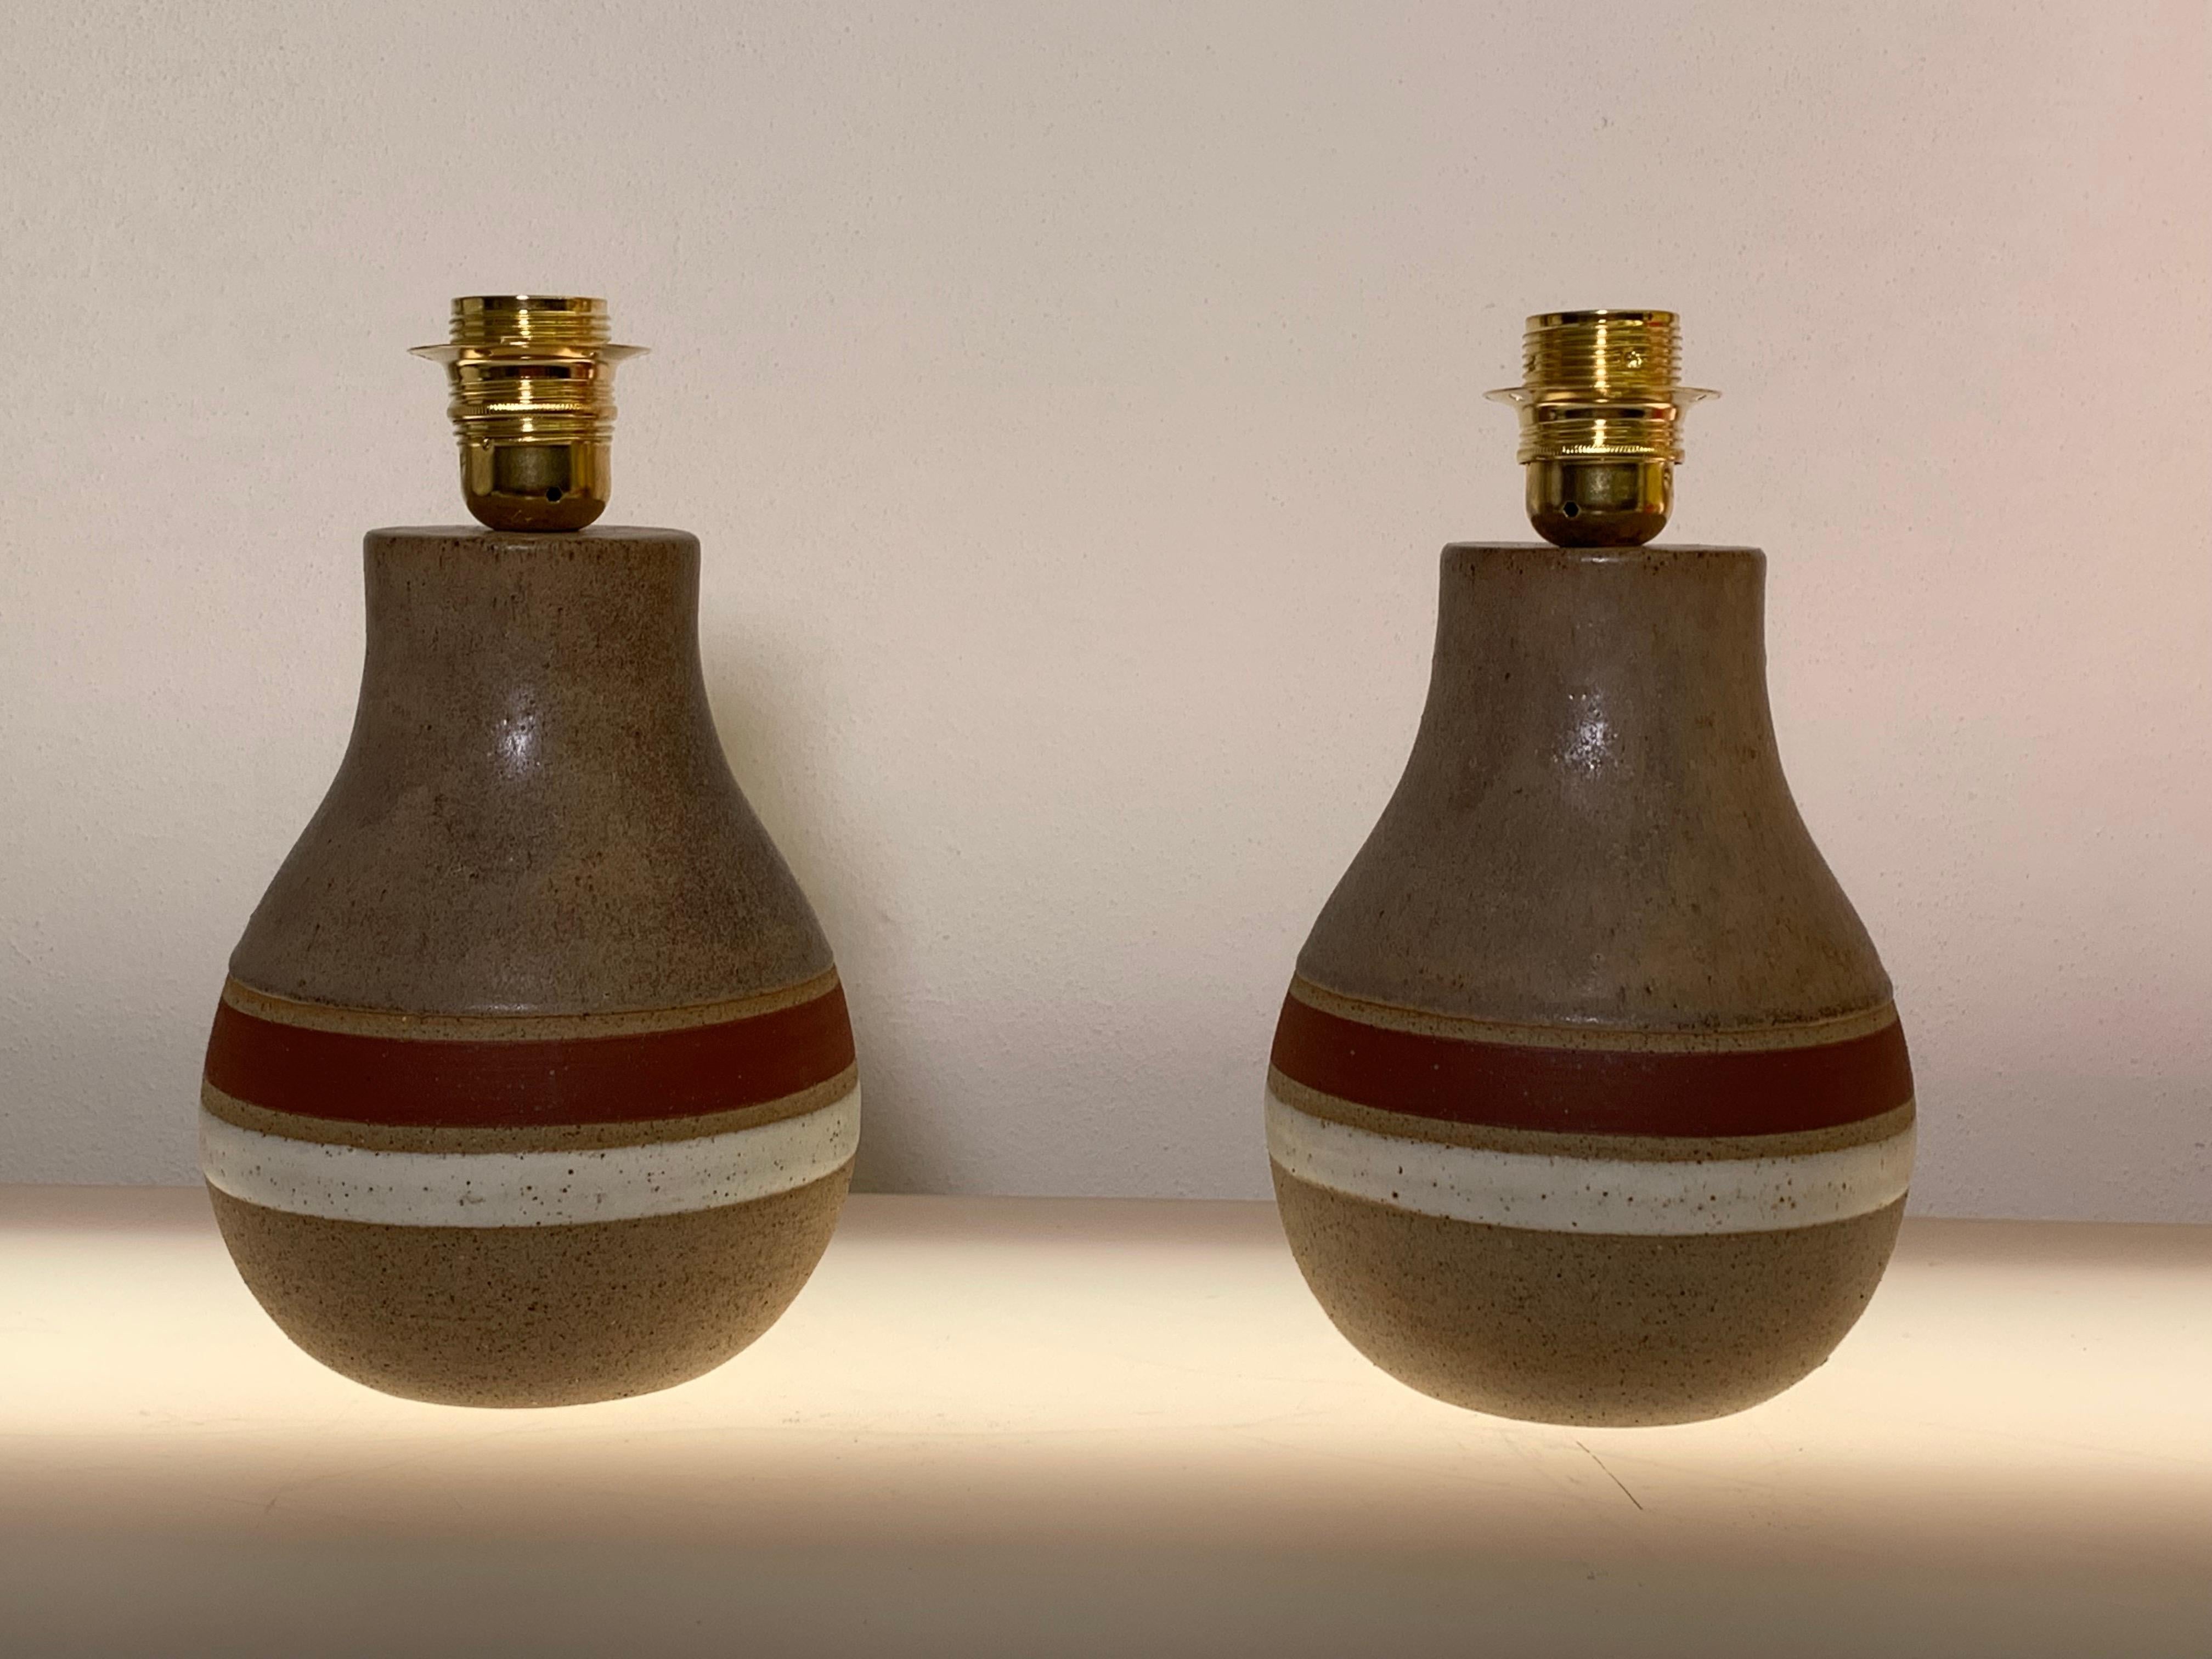 Bases of stoneware lamps designed by the famous Italian artist Bruno Gambone. Signed on the bottom.